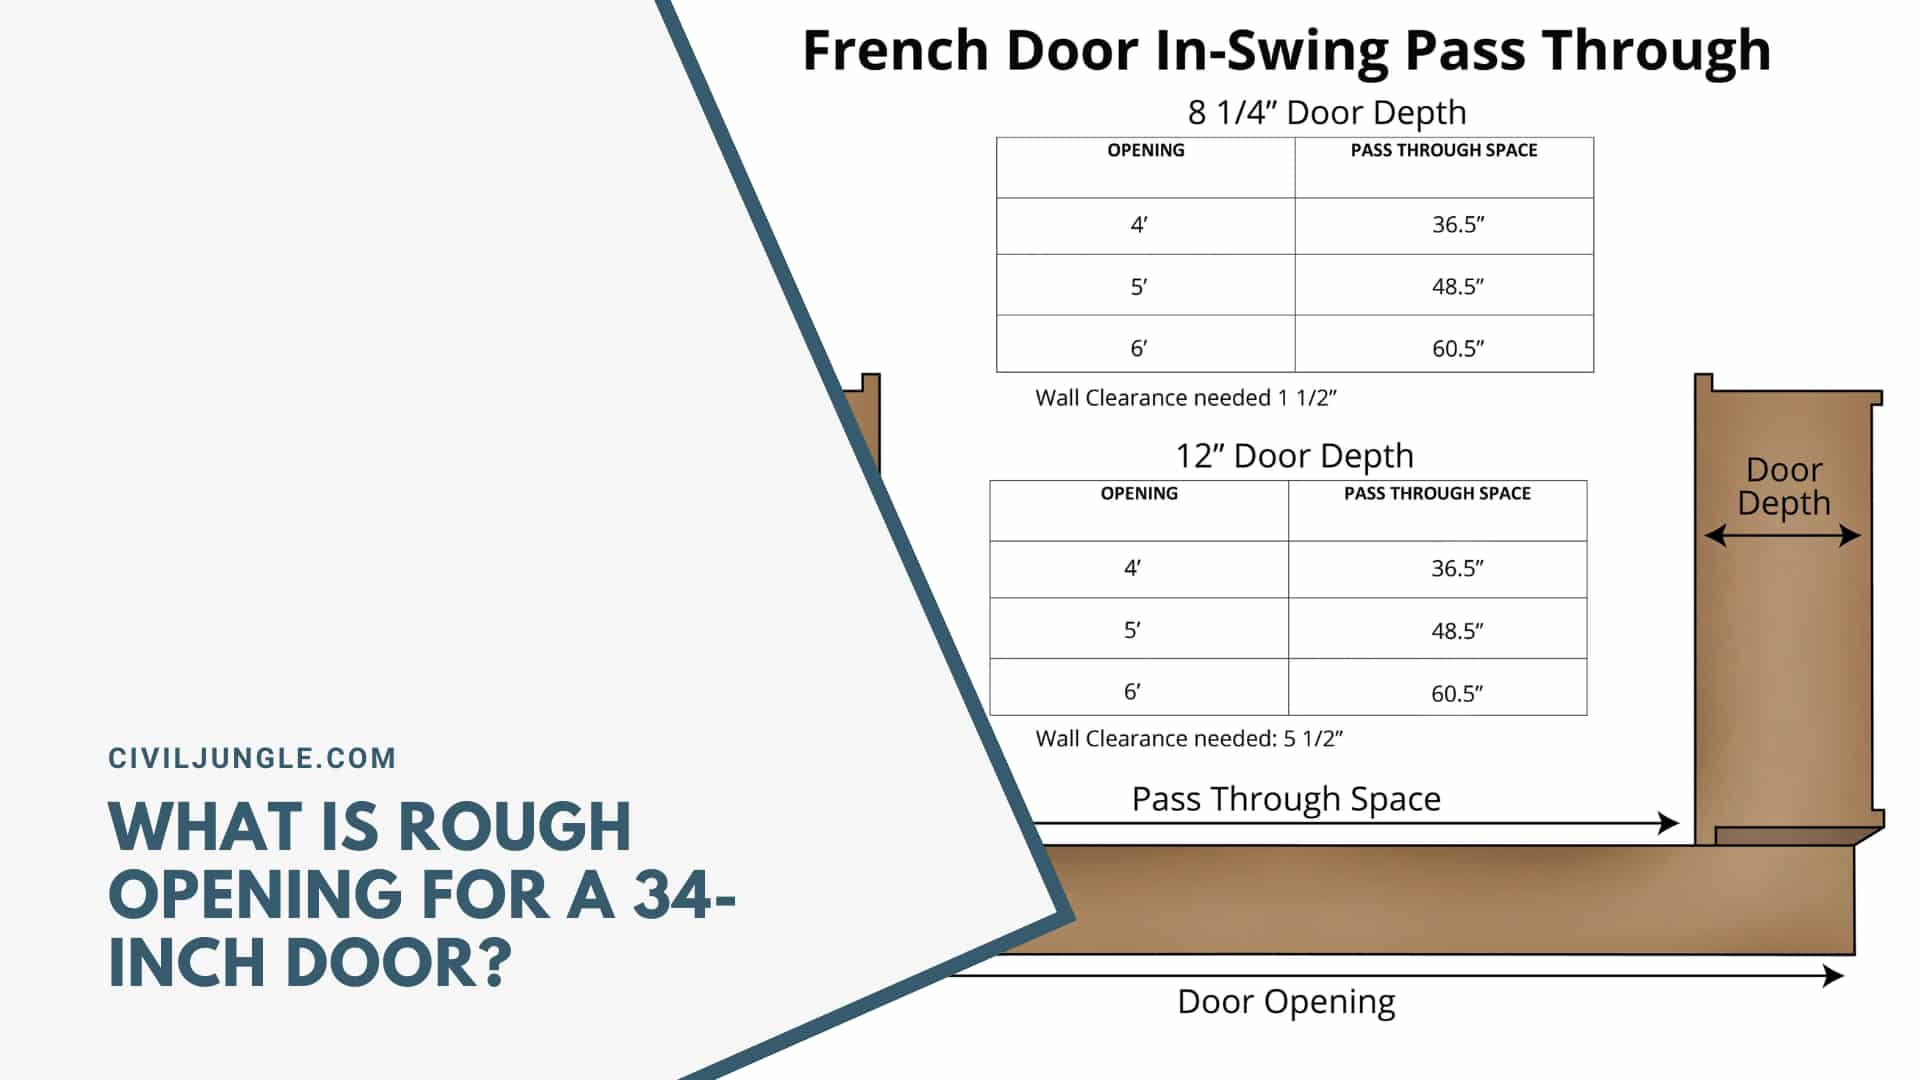 What Is Rough Opening for a 34-Inch Door?